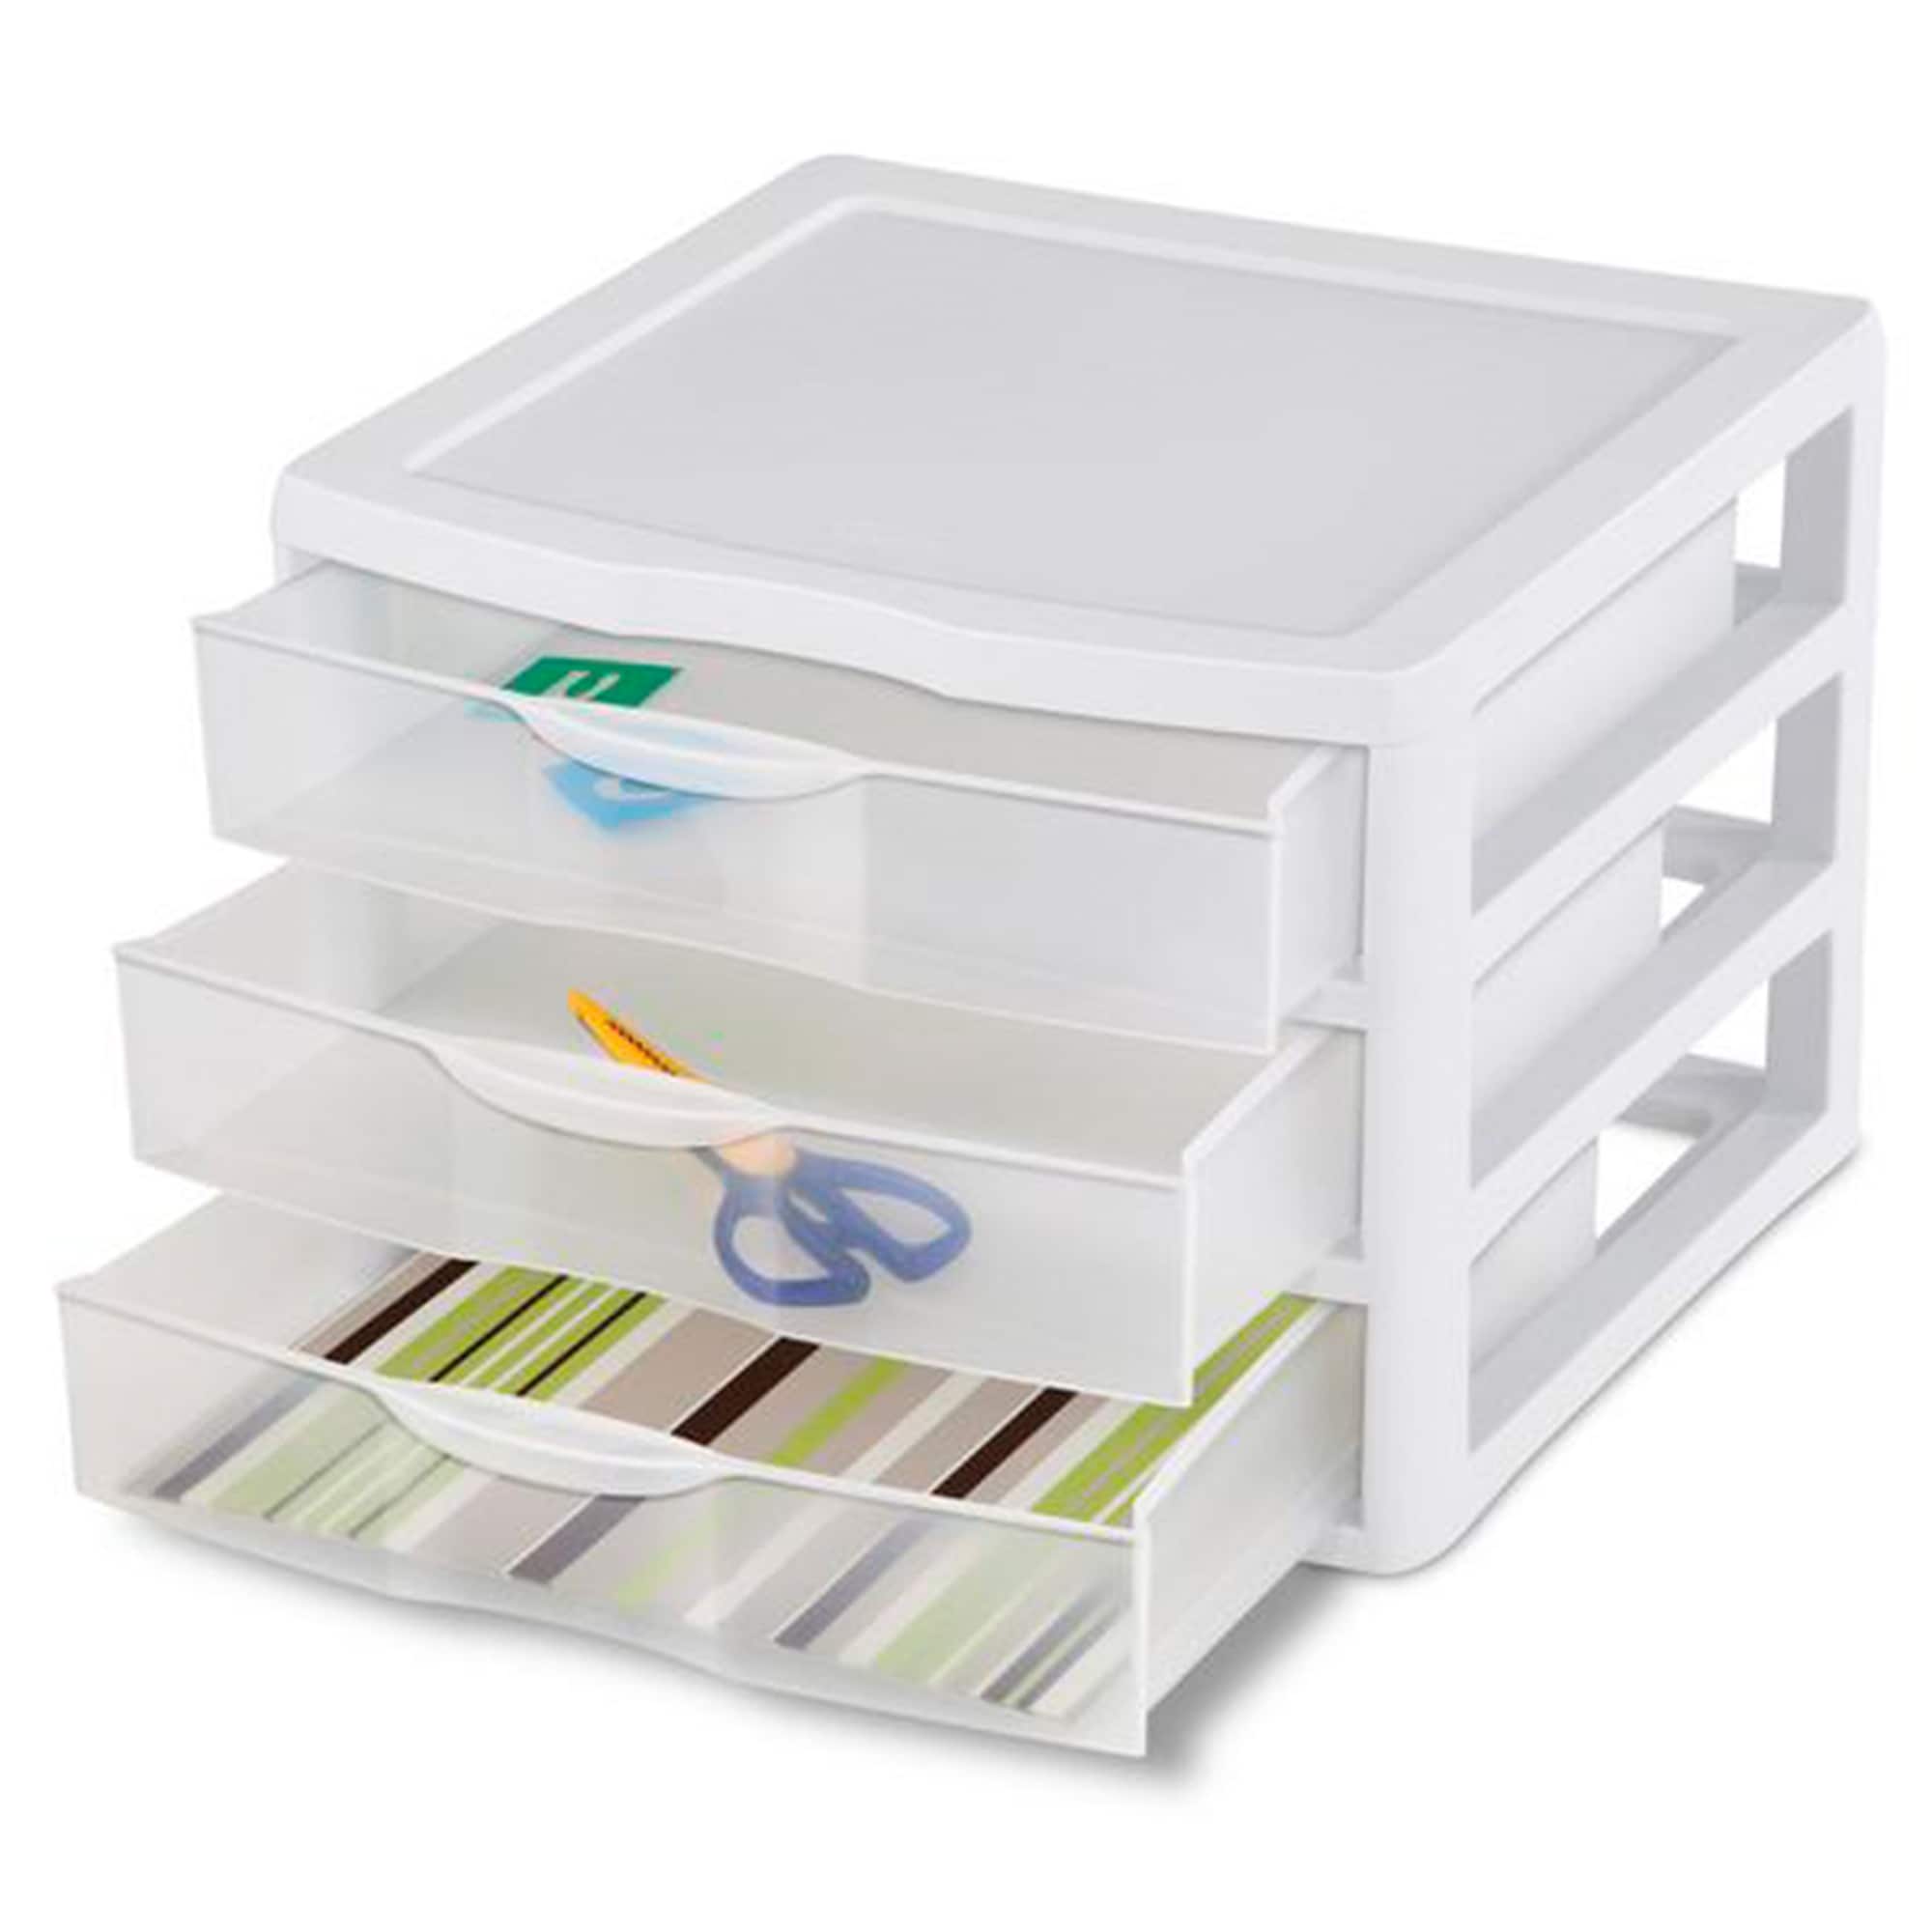 https://ak1.ostkcdn.com/images/products/is/images/direct/28f0c99f4be0f2186186e32c9c00e1a585ab2ede/Sterilite-Clear-Plastic-Stackable-Small-3-Drawer-Storage-System%2C-White%2C-%286-Pack%29.jpg